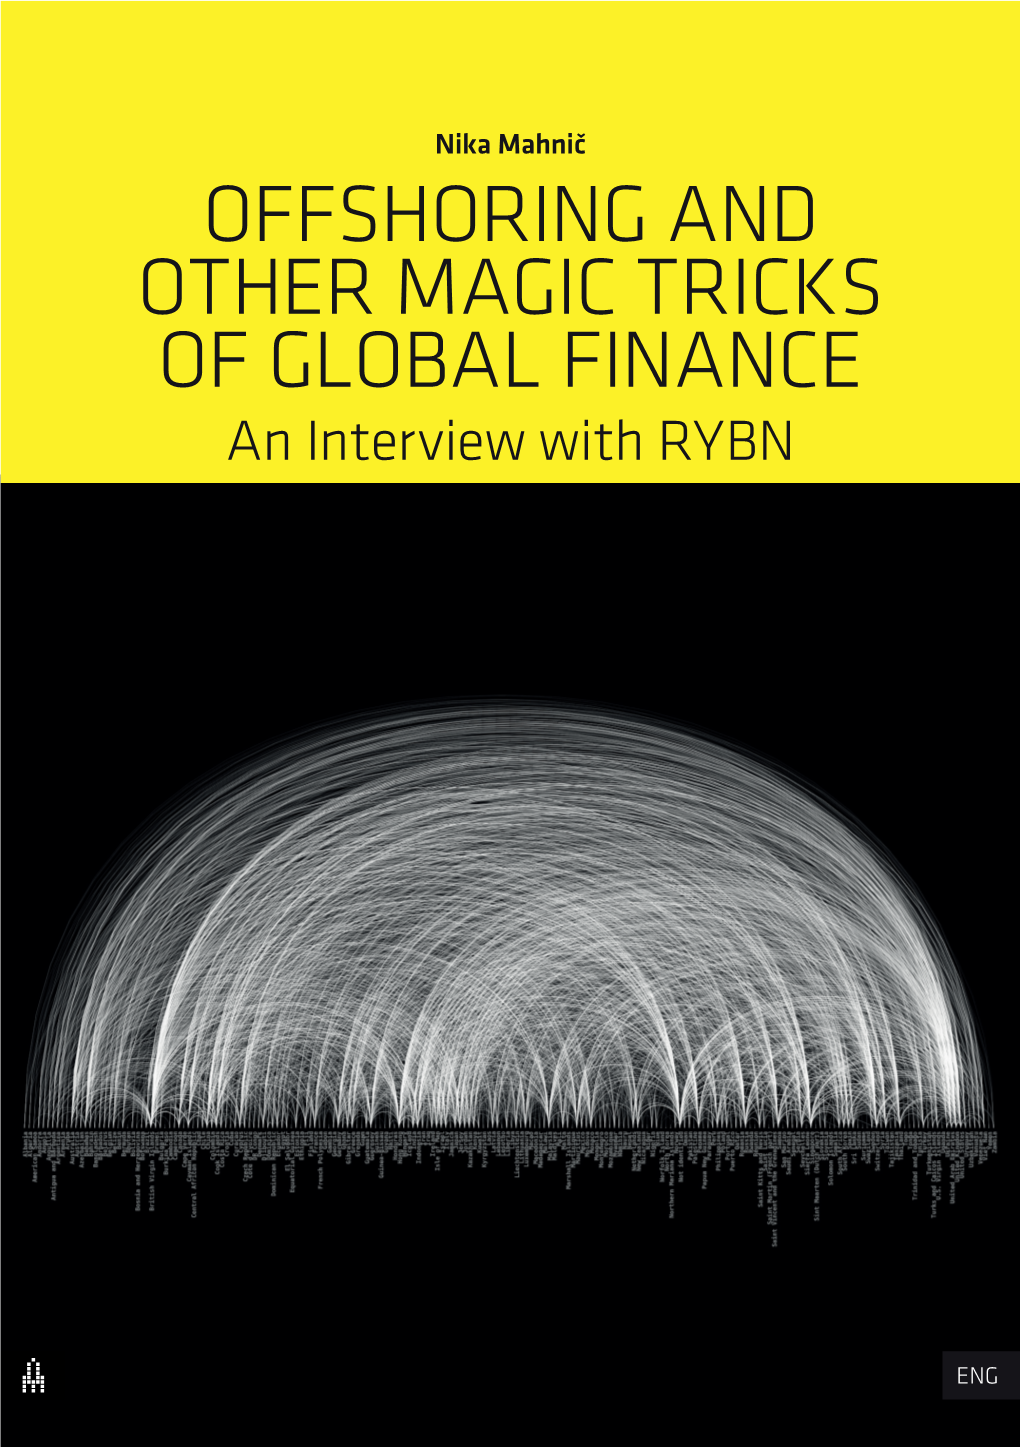 OFFSHORING and OTHER MAGIC TRICKS of GLOBAL FINANCE an Interview with RYBN